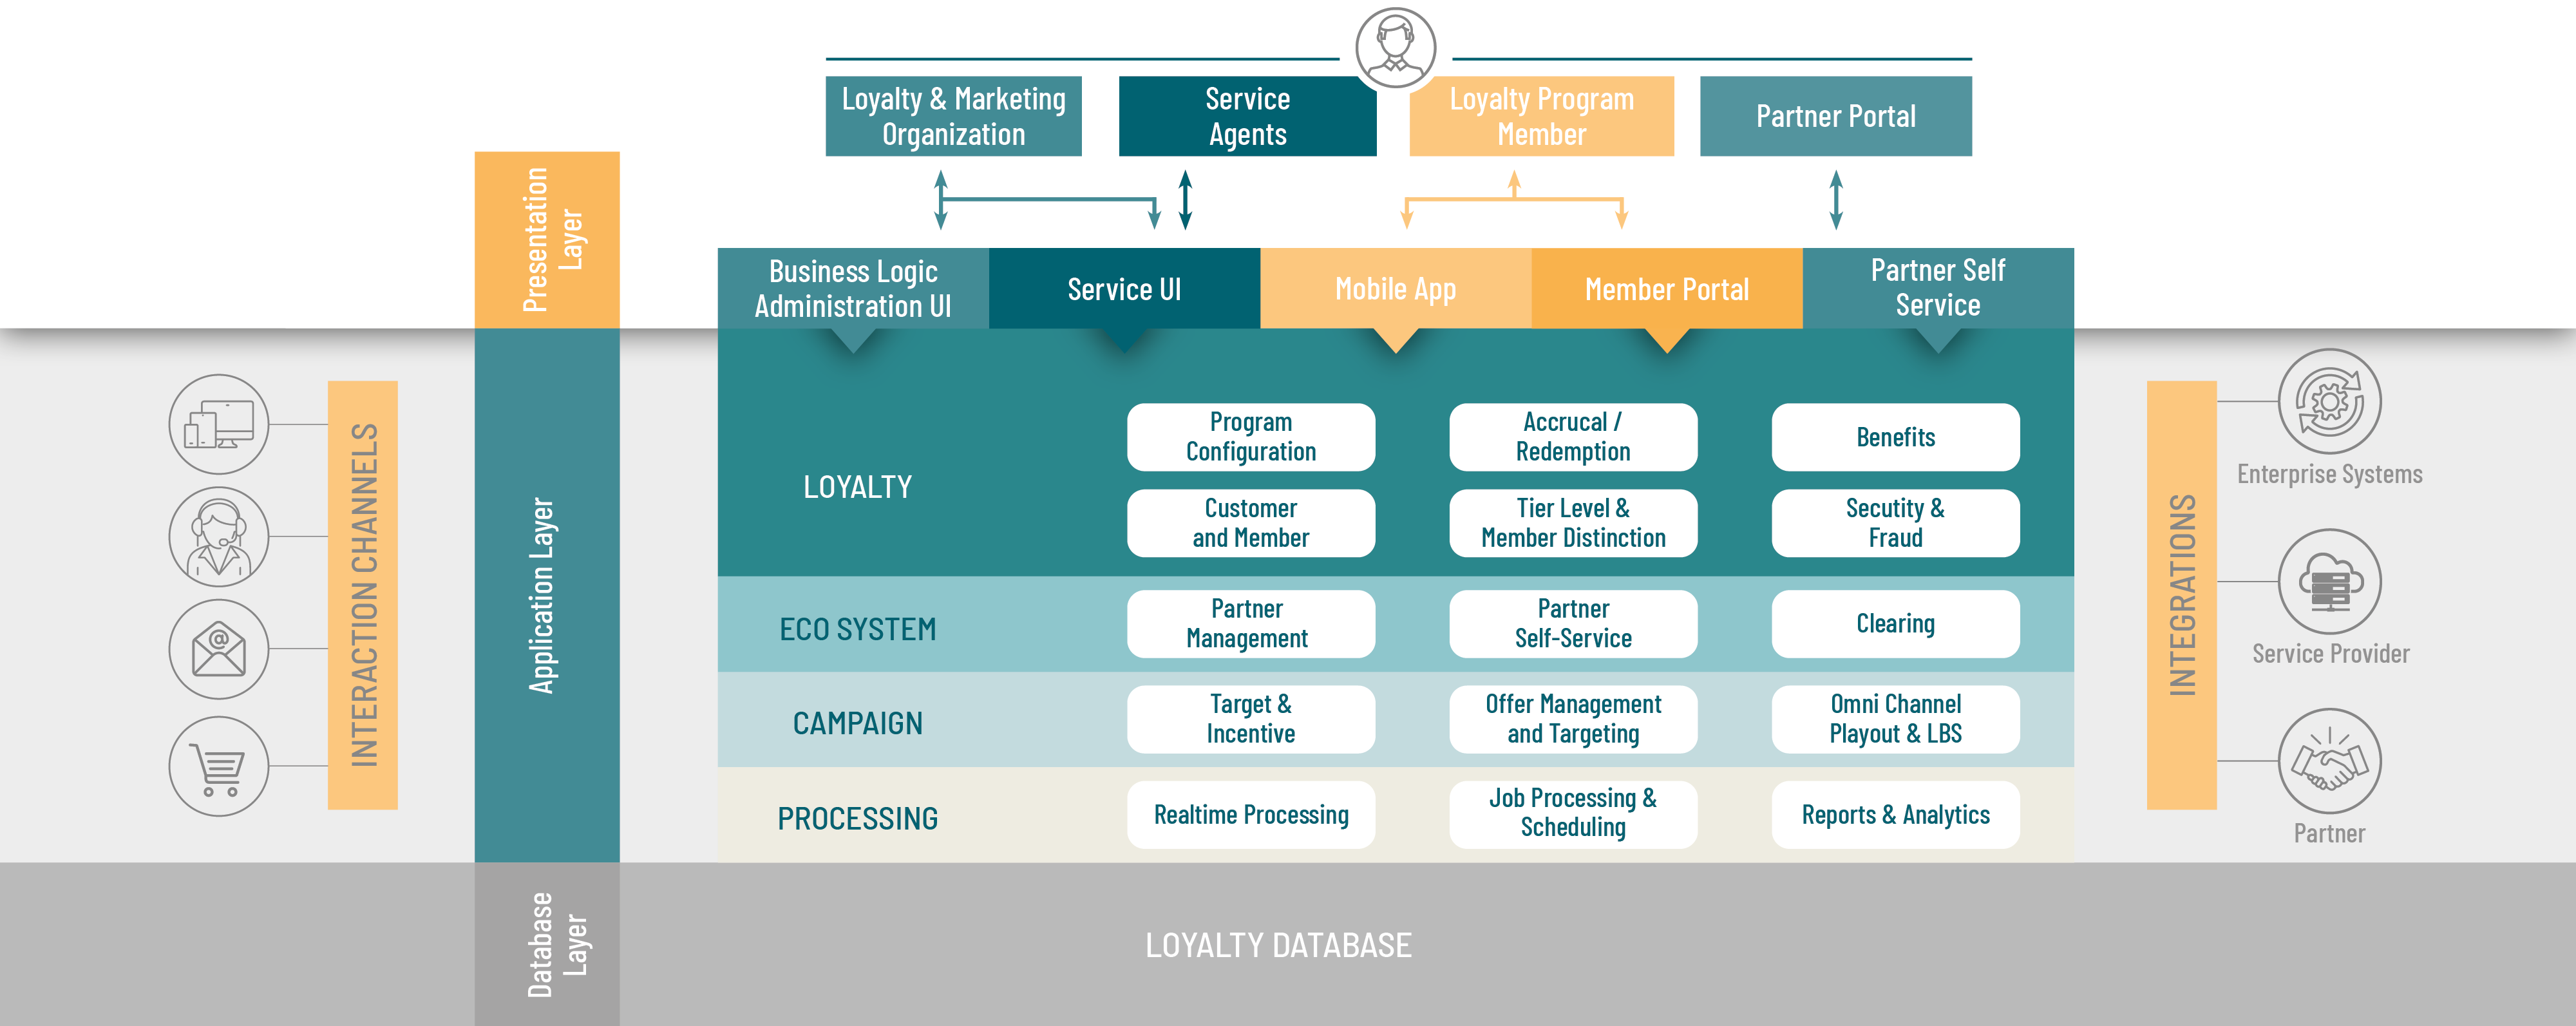 How the Loyalty Management Suite works